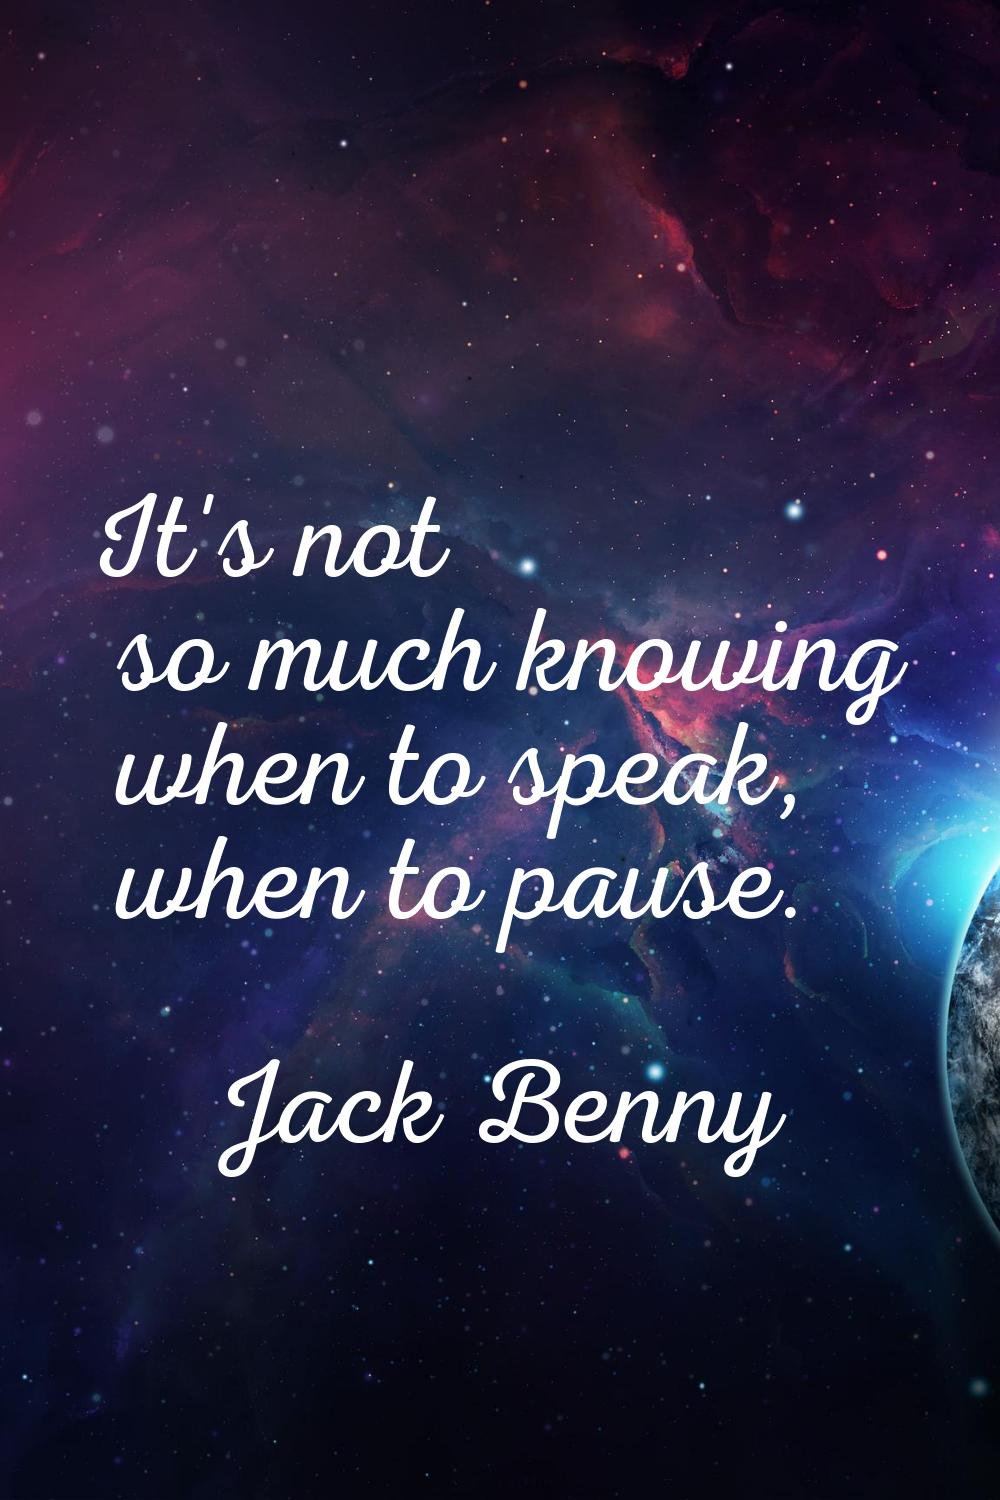 It's not so much knowing when to speak, when to pause.